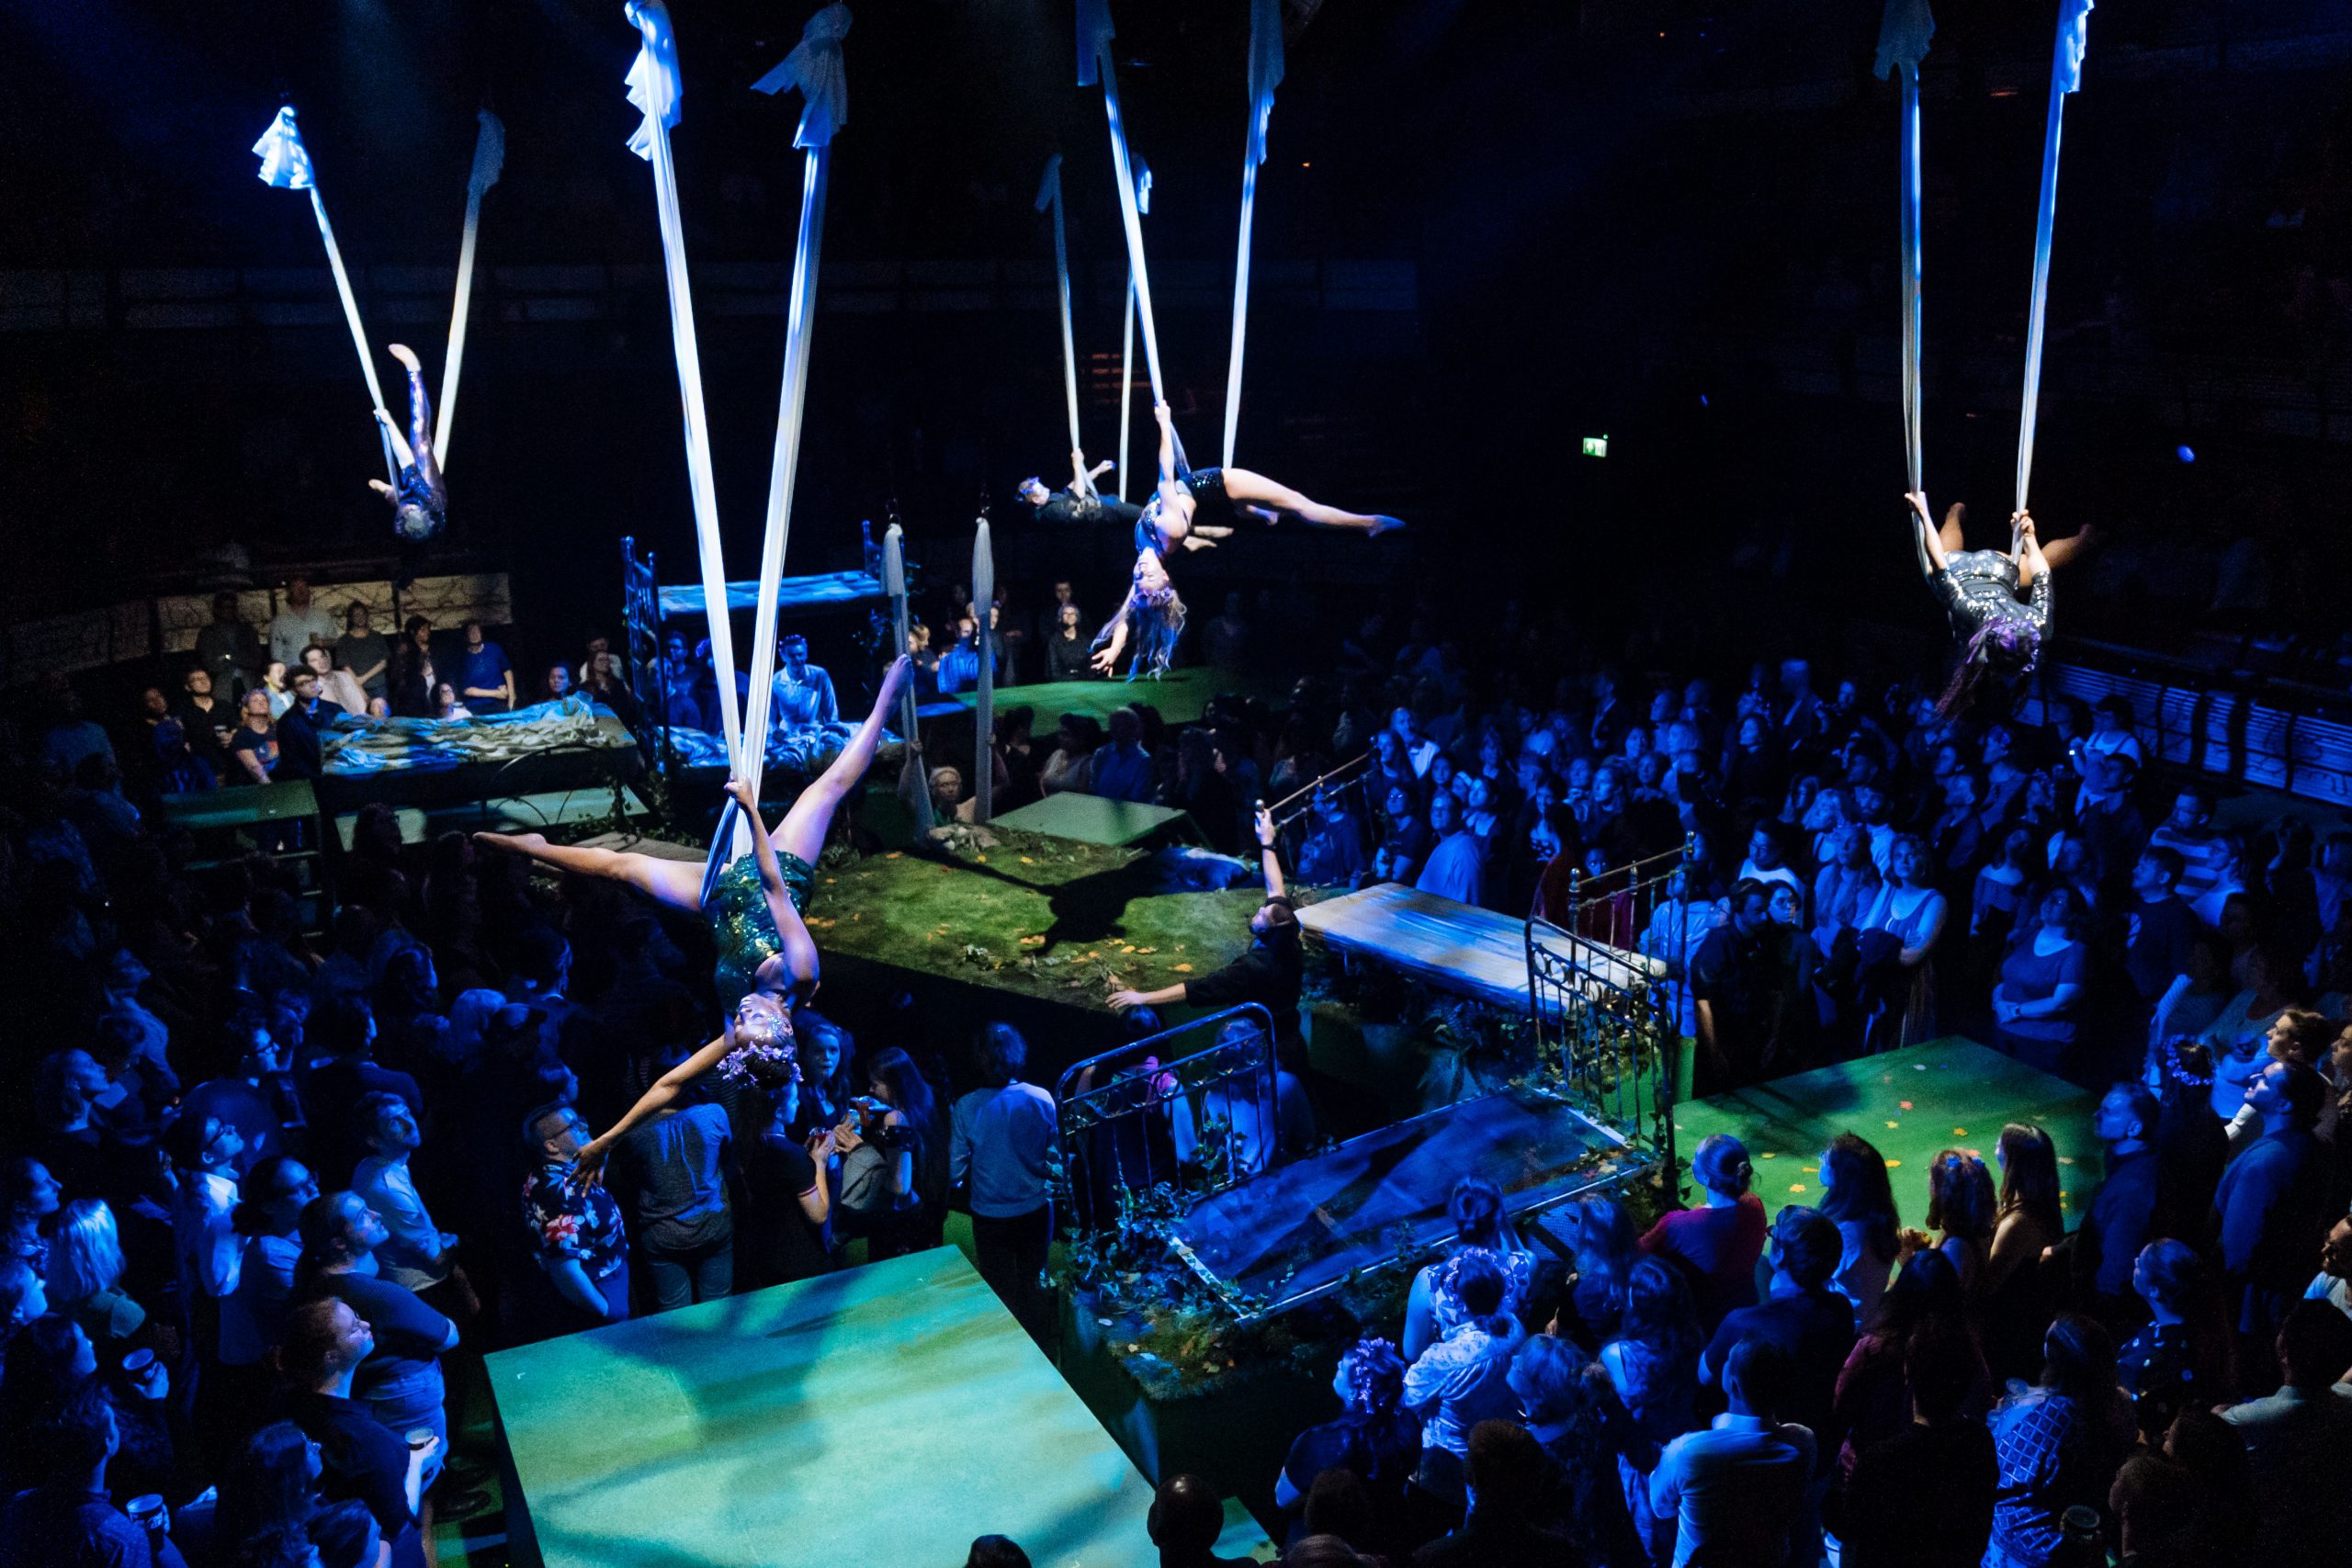 "A Midsummer Night’s Dream" at the Bridge Theatre Theatre reviews by